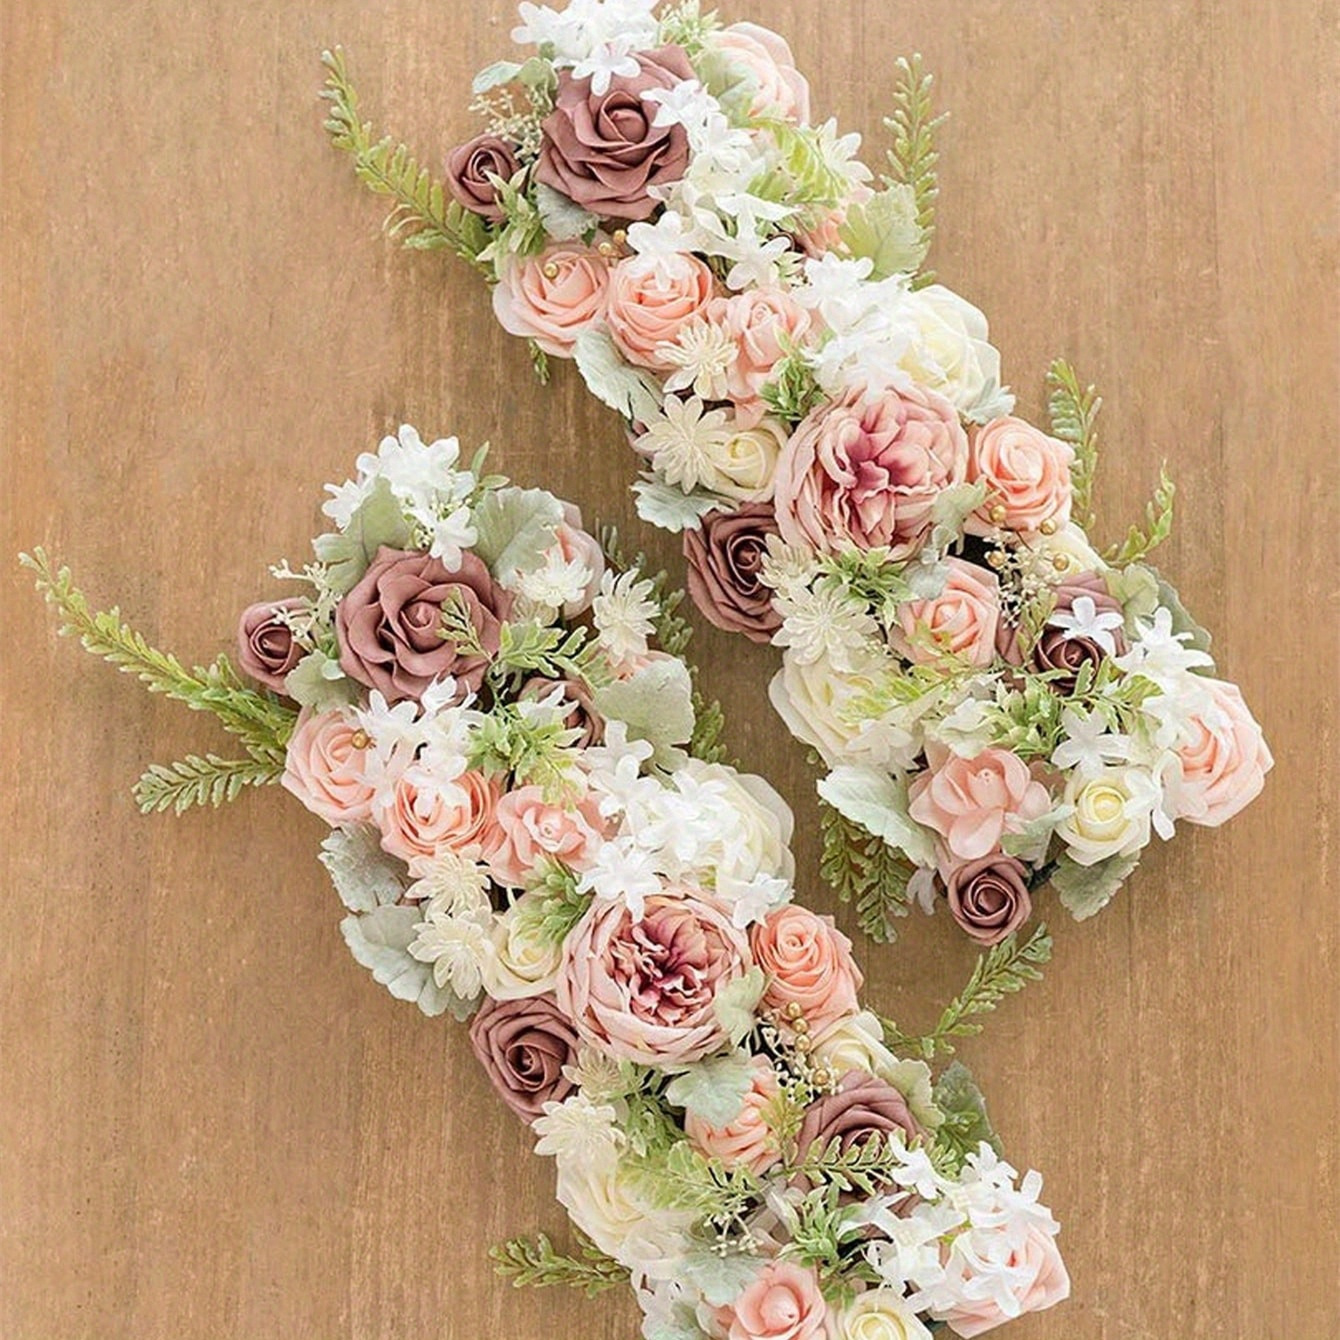 

2pcs/kit Flower Table Row For Wedding Artificial Table Flower Arrangement Weeding Rose Floral Centerpieces For Reception Table Runner Dining Table Living Room Kitchen Party Birthday